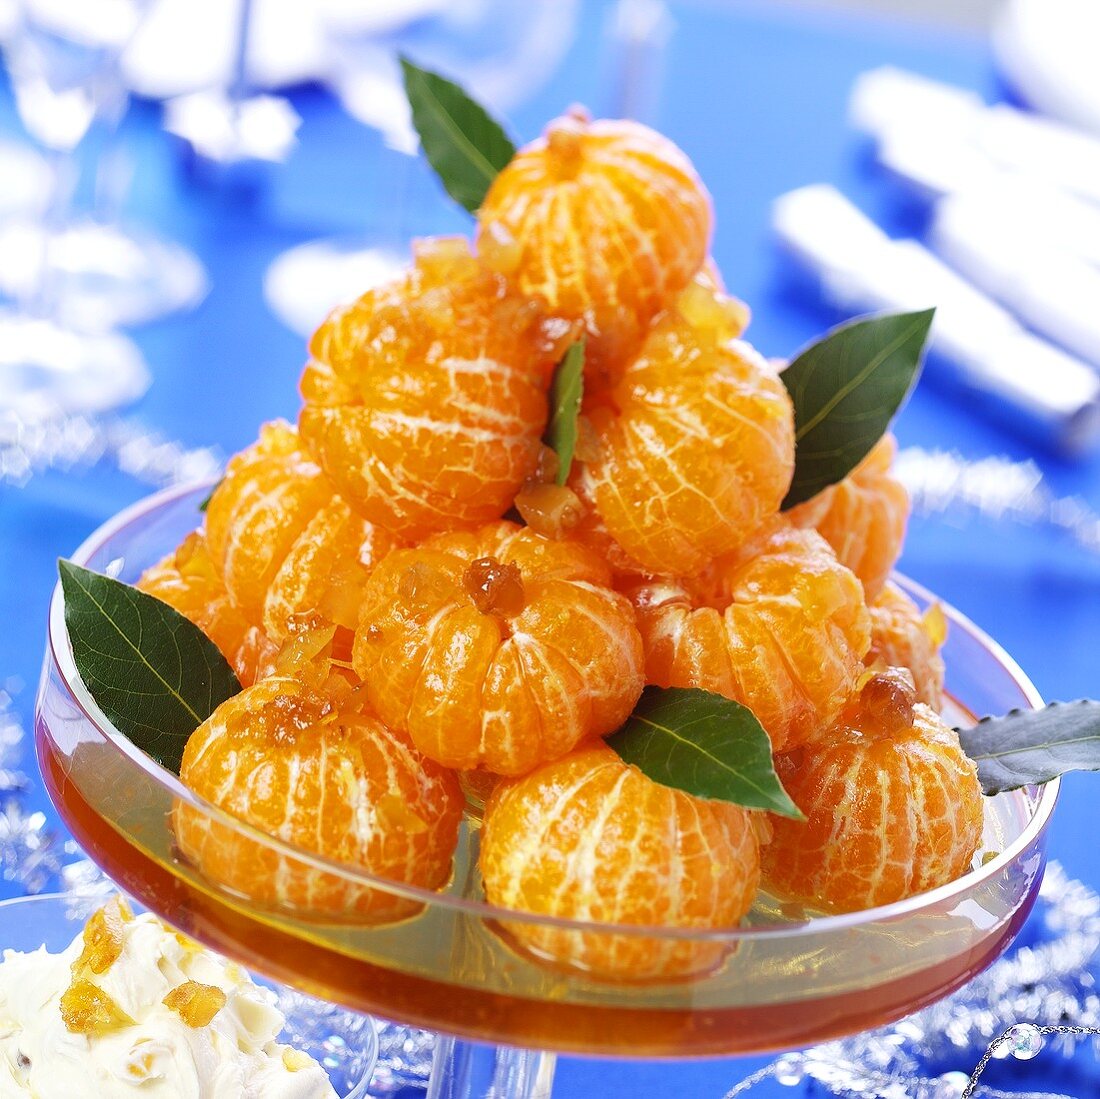 Mandarins with raisins in syrup